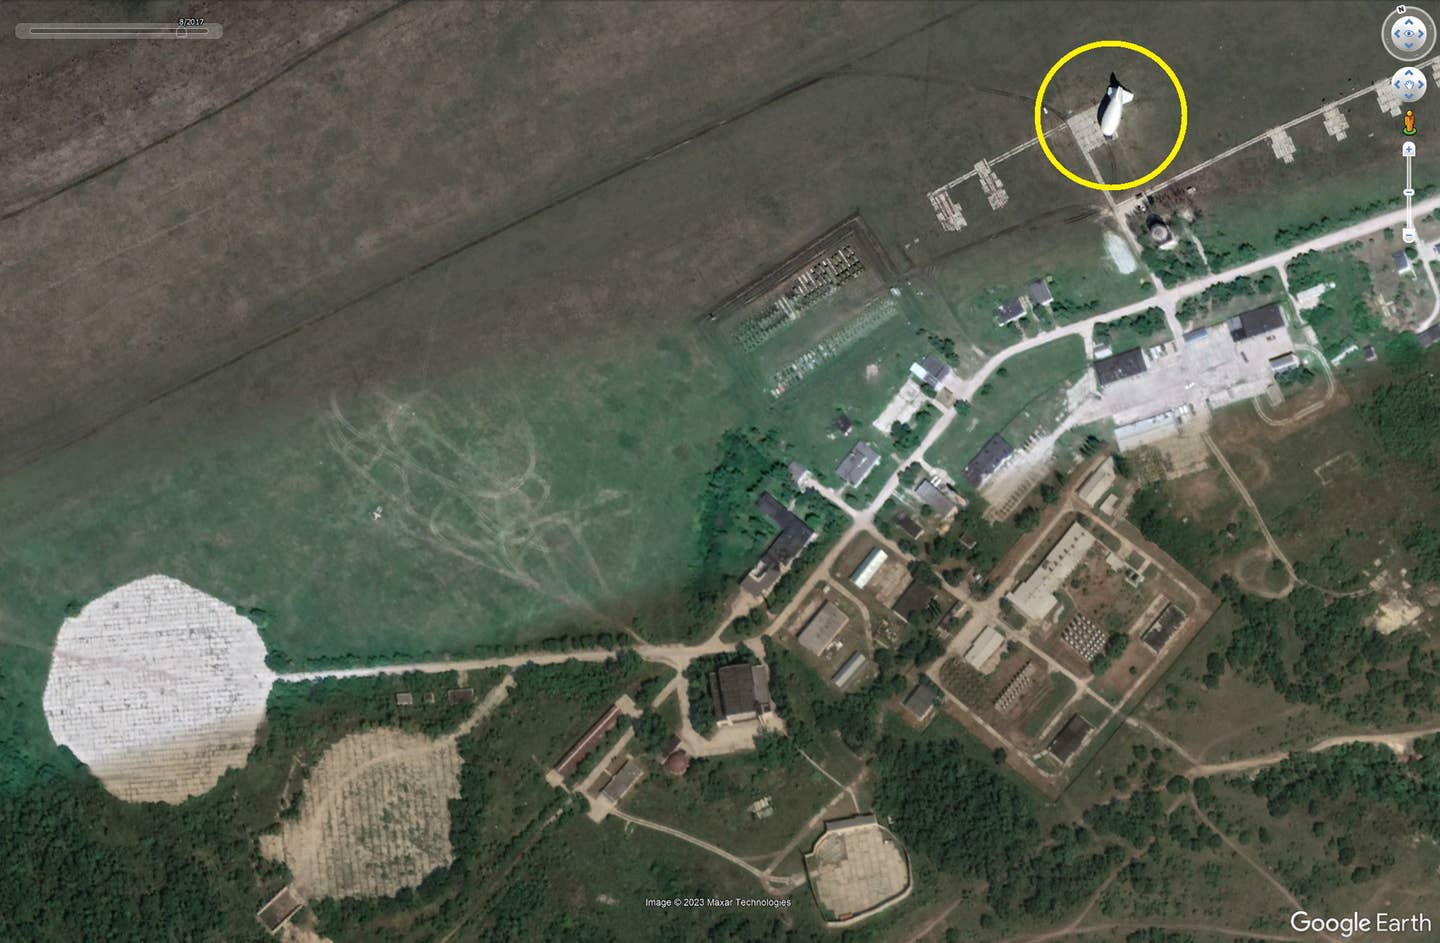 A satellite image of the military aeronautical test center in Volsk in August 2017, with an Augur Tigr, a smaller kind of tethered aerostat, being tested there. <em>Google Earth</em>